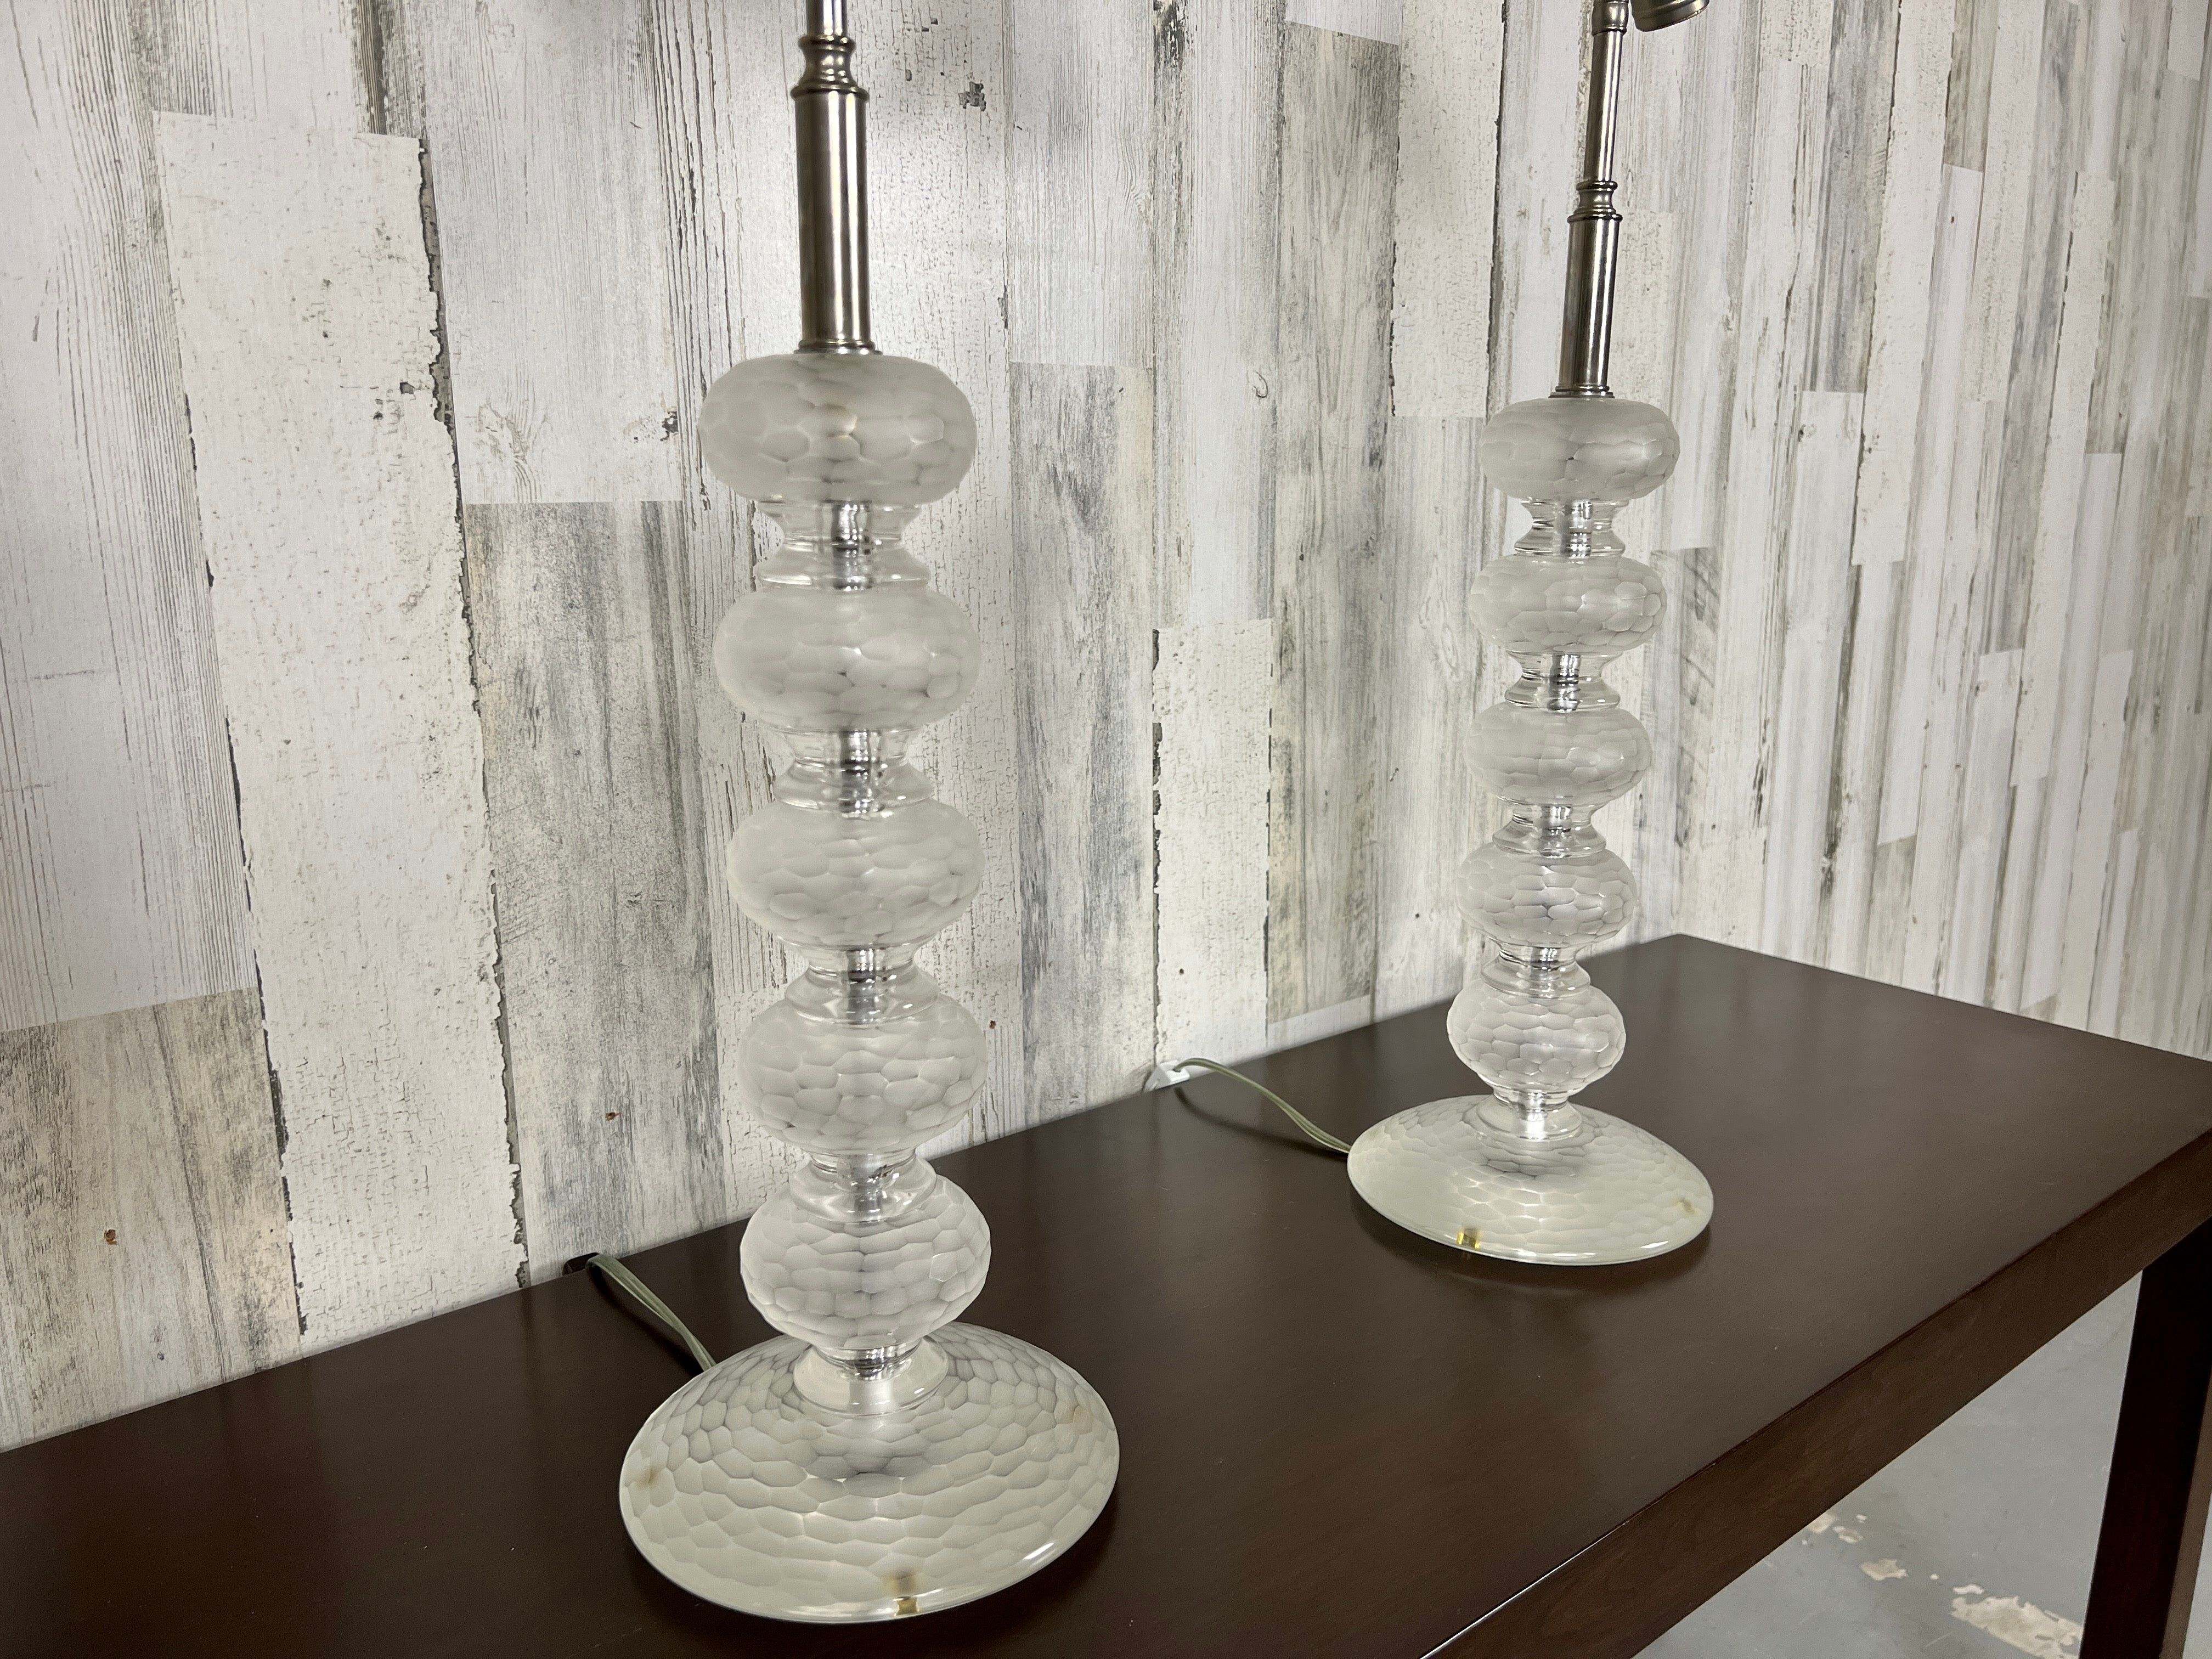 A pair of stylish faceted glass Murano glass lamps with nickel plated fittings both signed on inside of base Cenedese.
Lamp shades are not included.